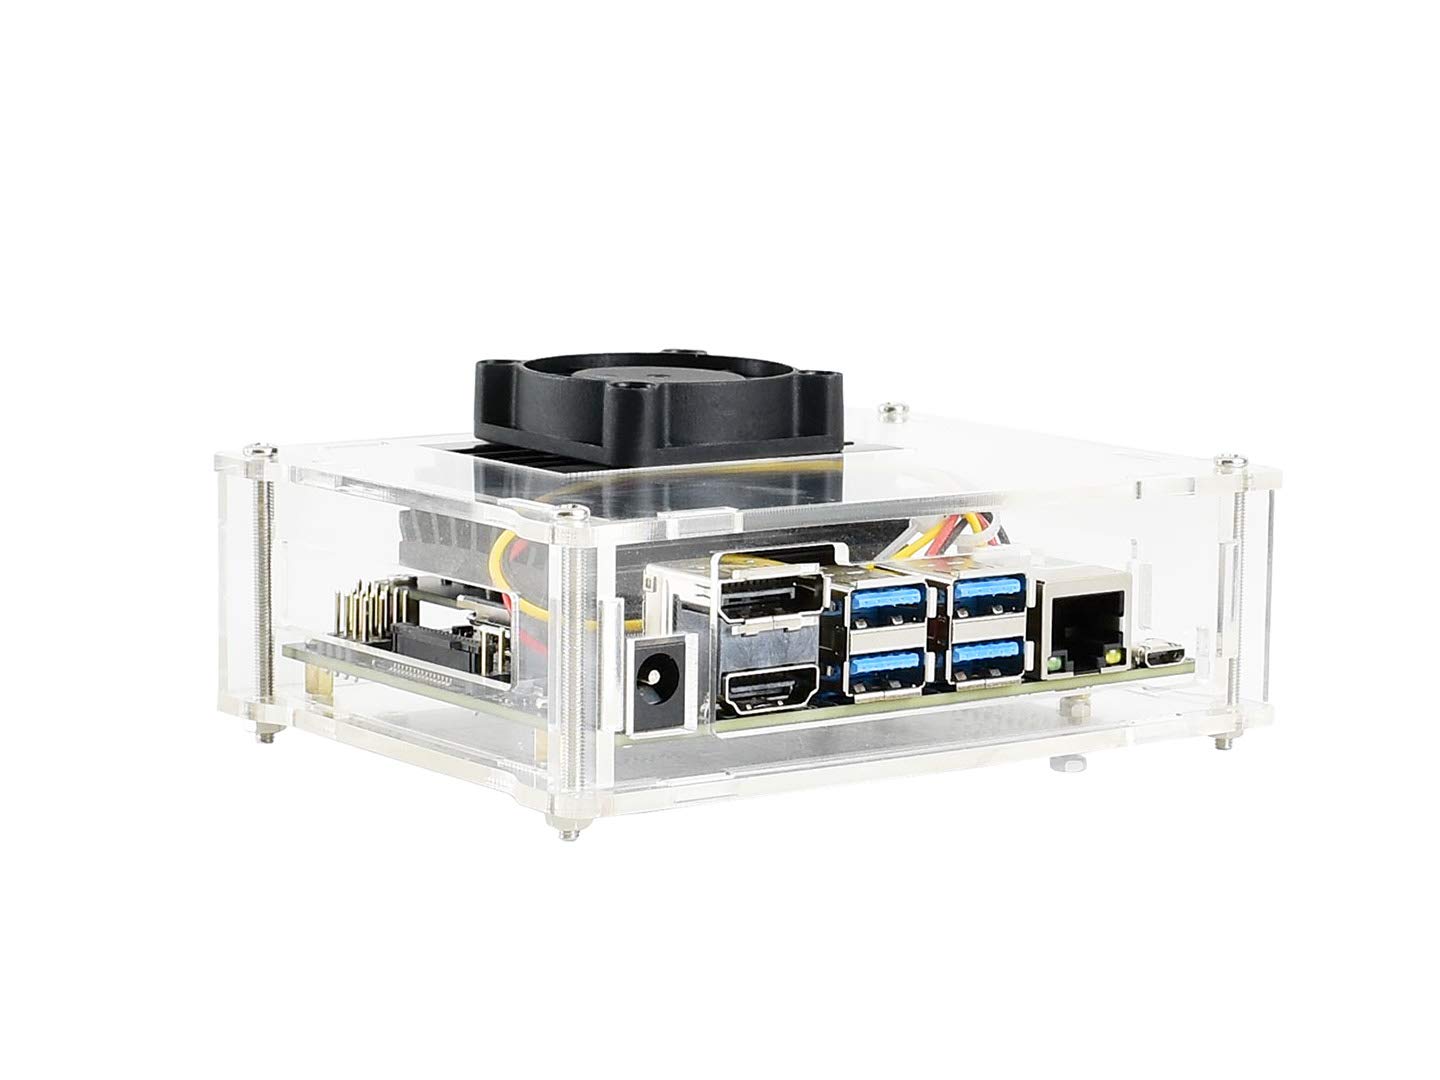 Waveshare Acrylic Case (Type A) and Dedicated Cooling Fan for The Jetson Nano Developer Kit